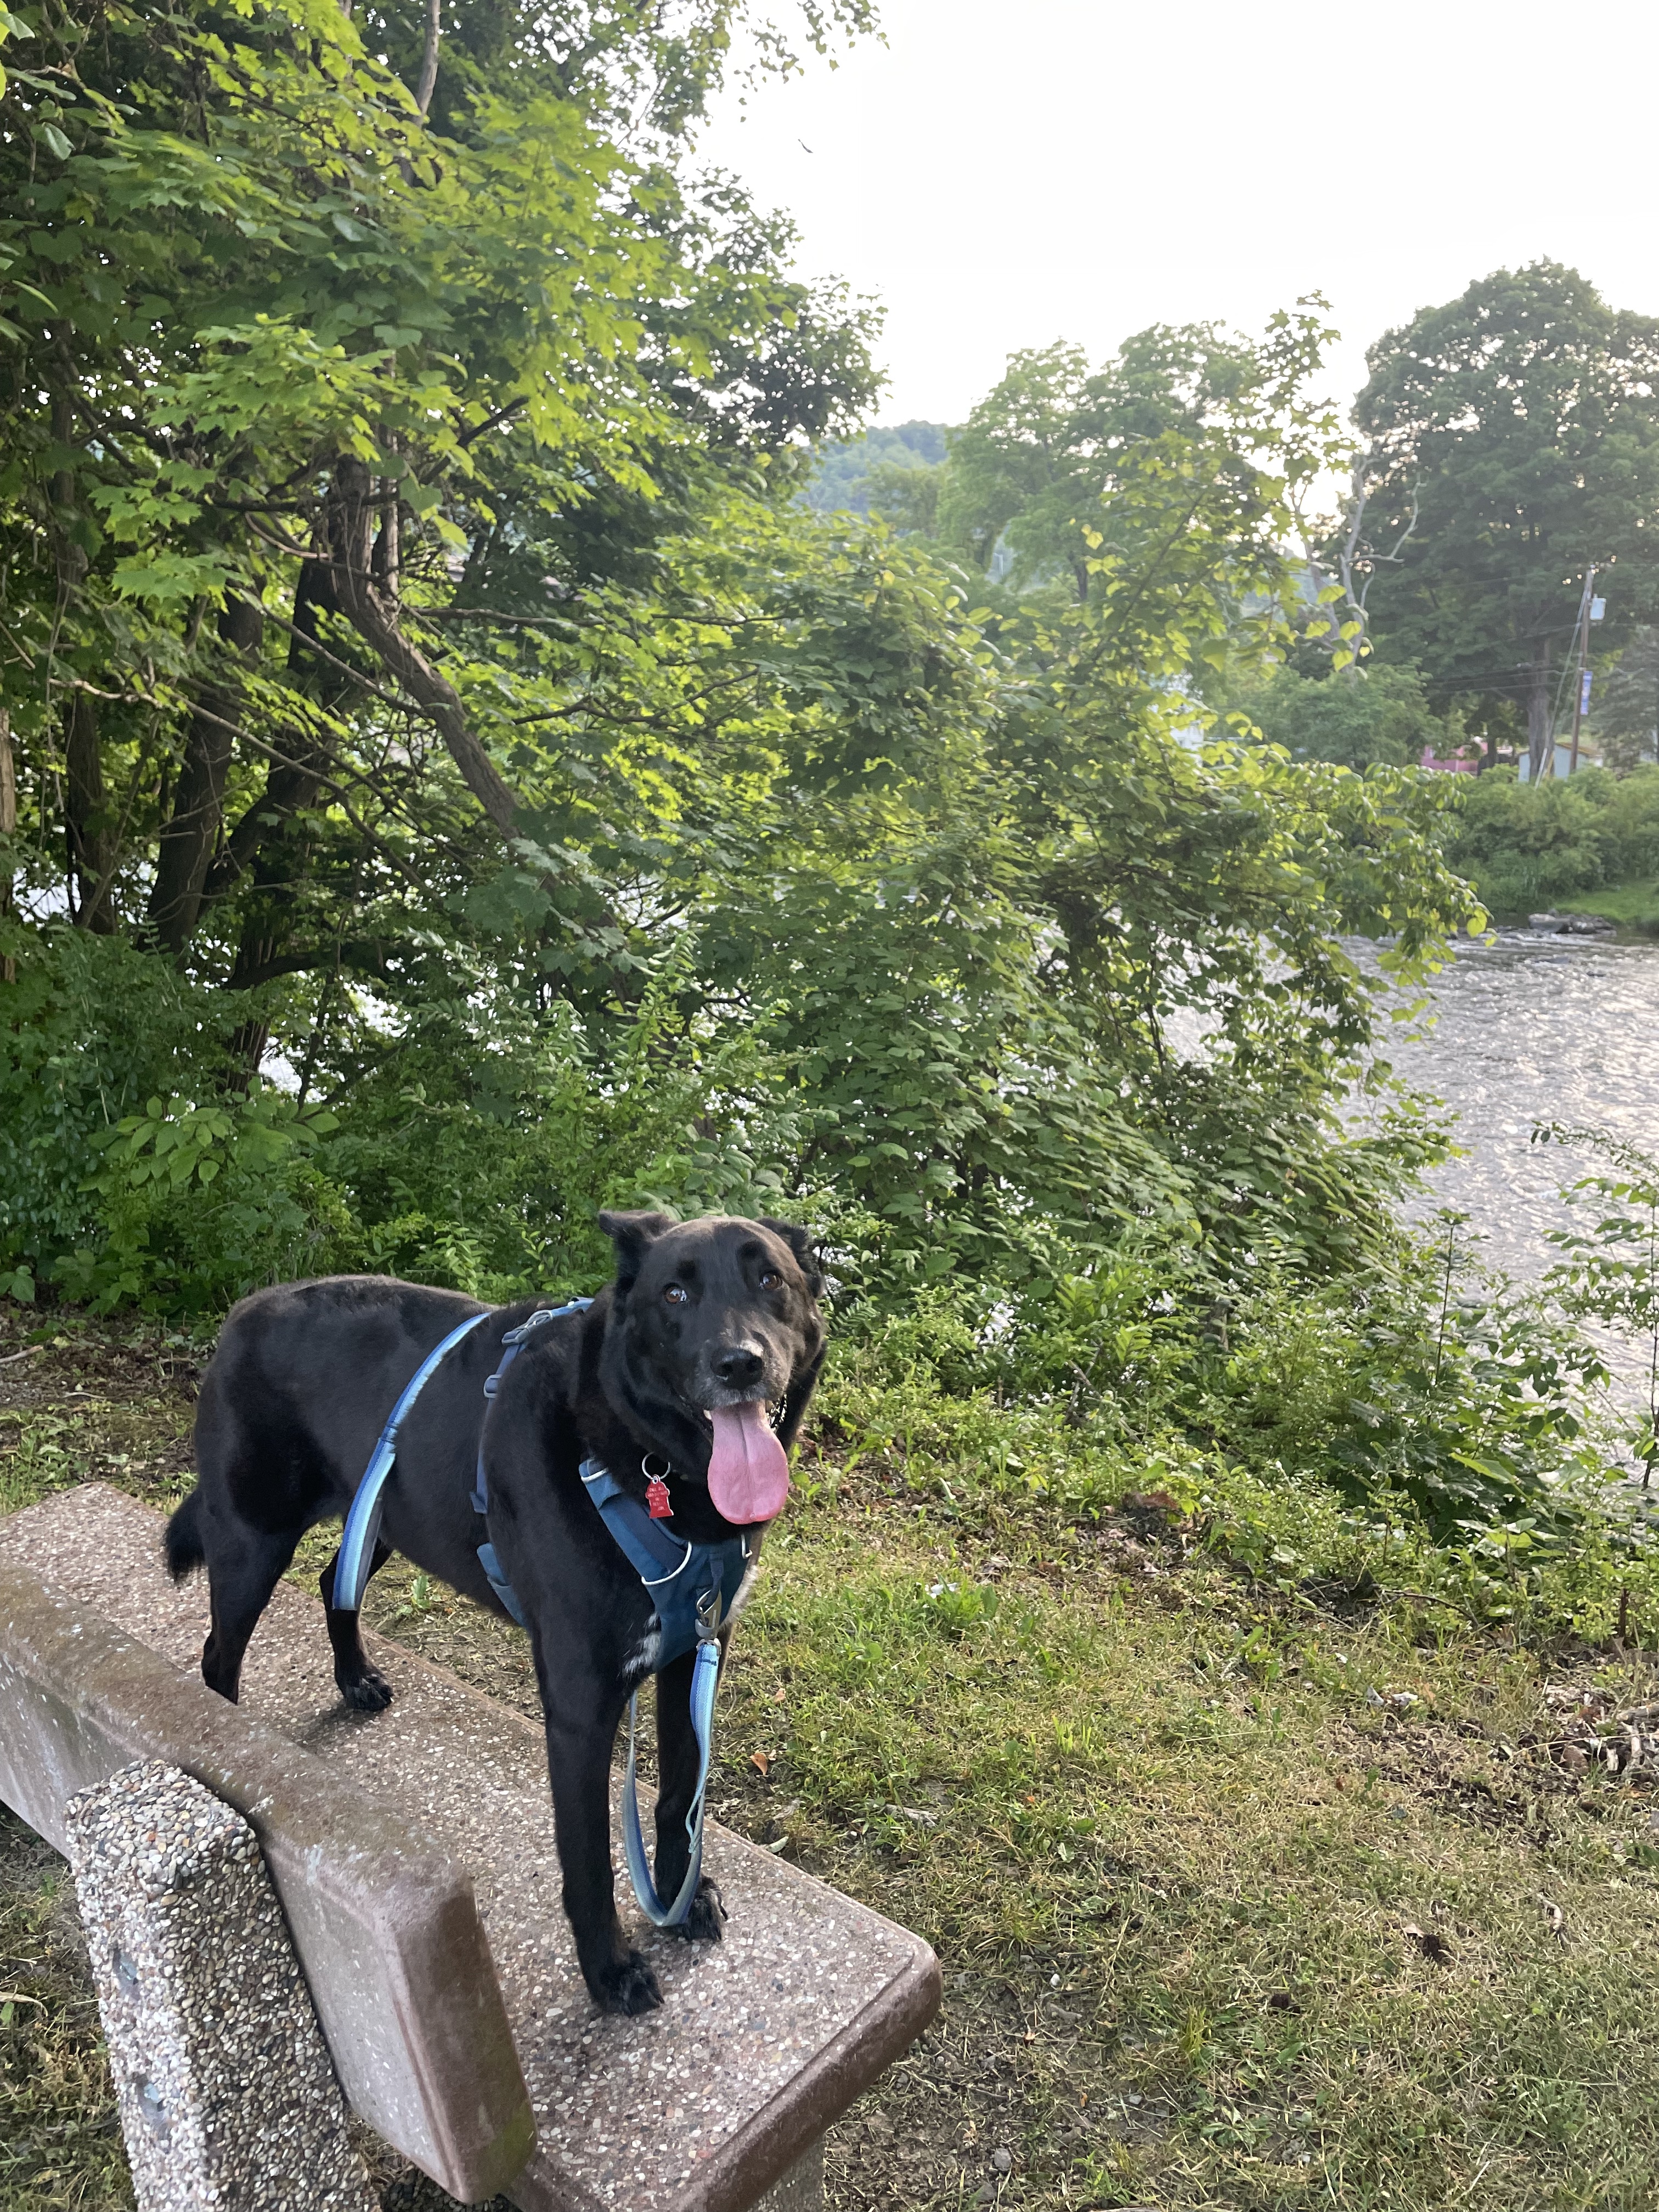 Black dog standing on a bench overlooking a river